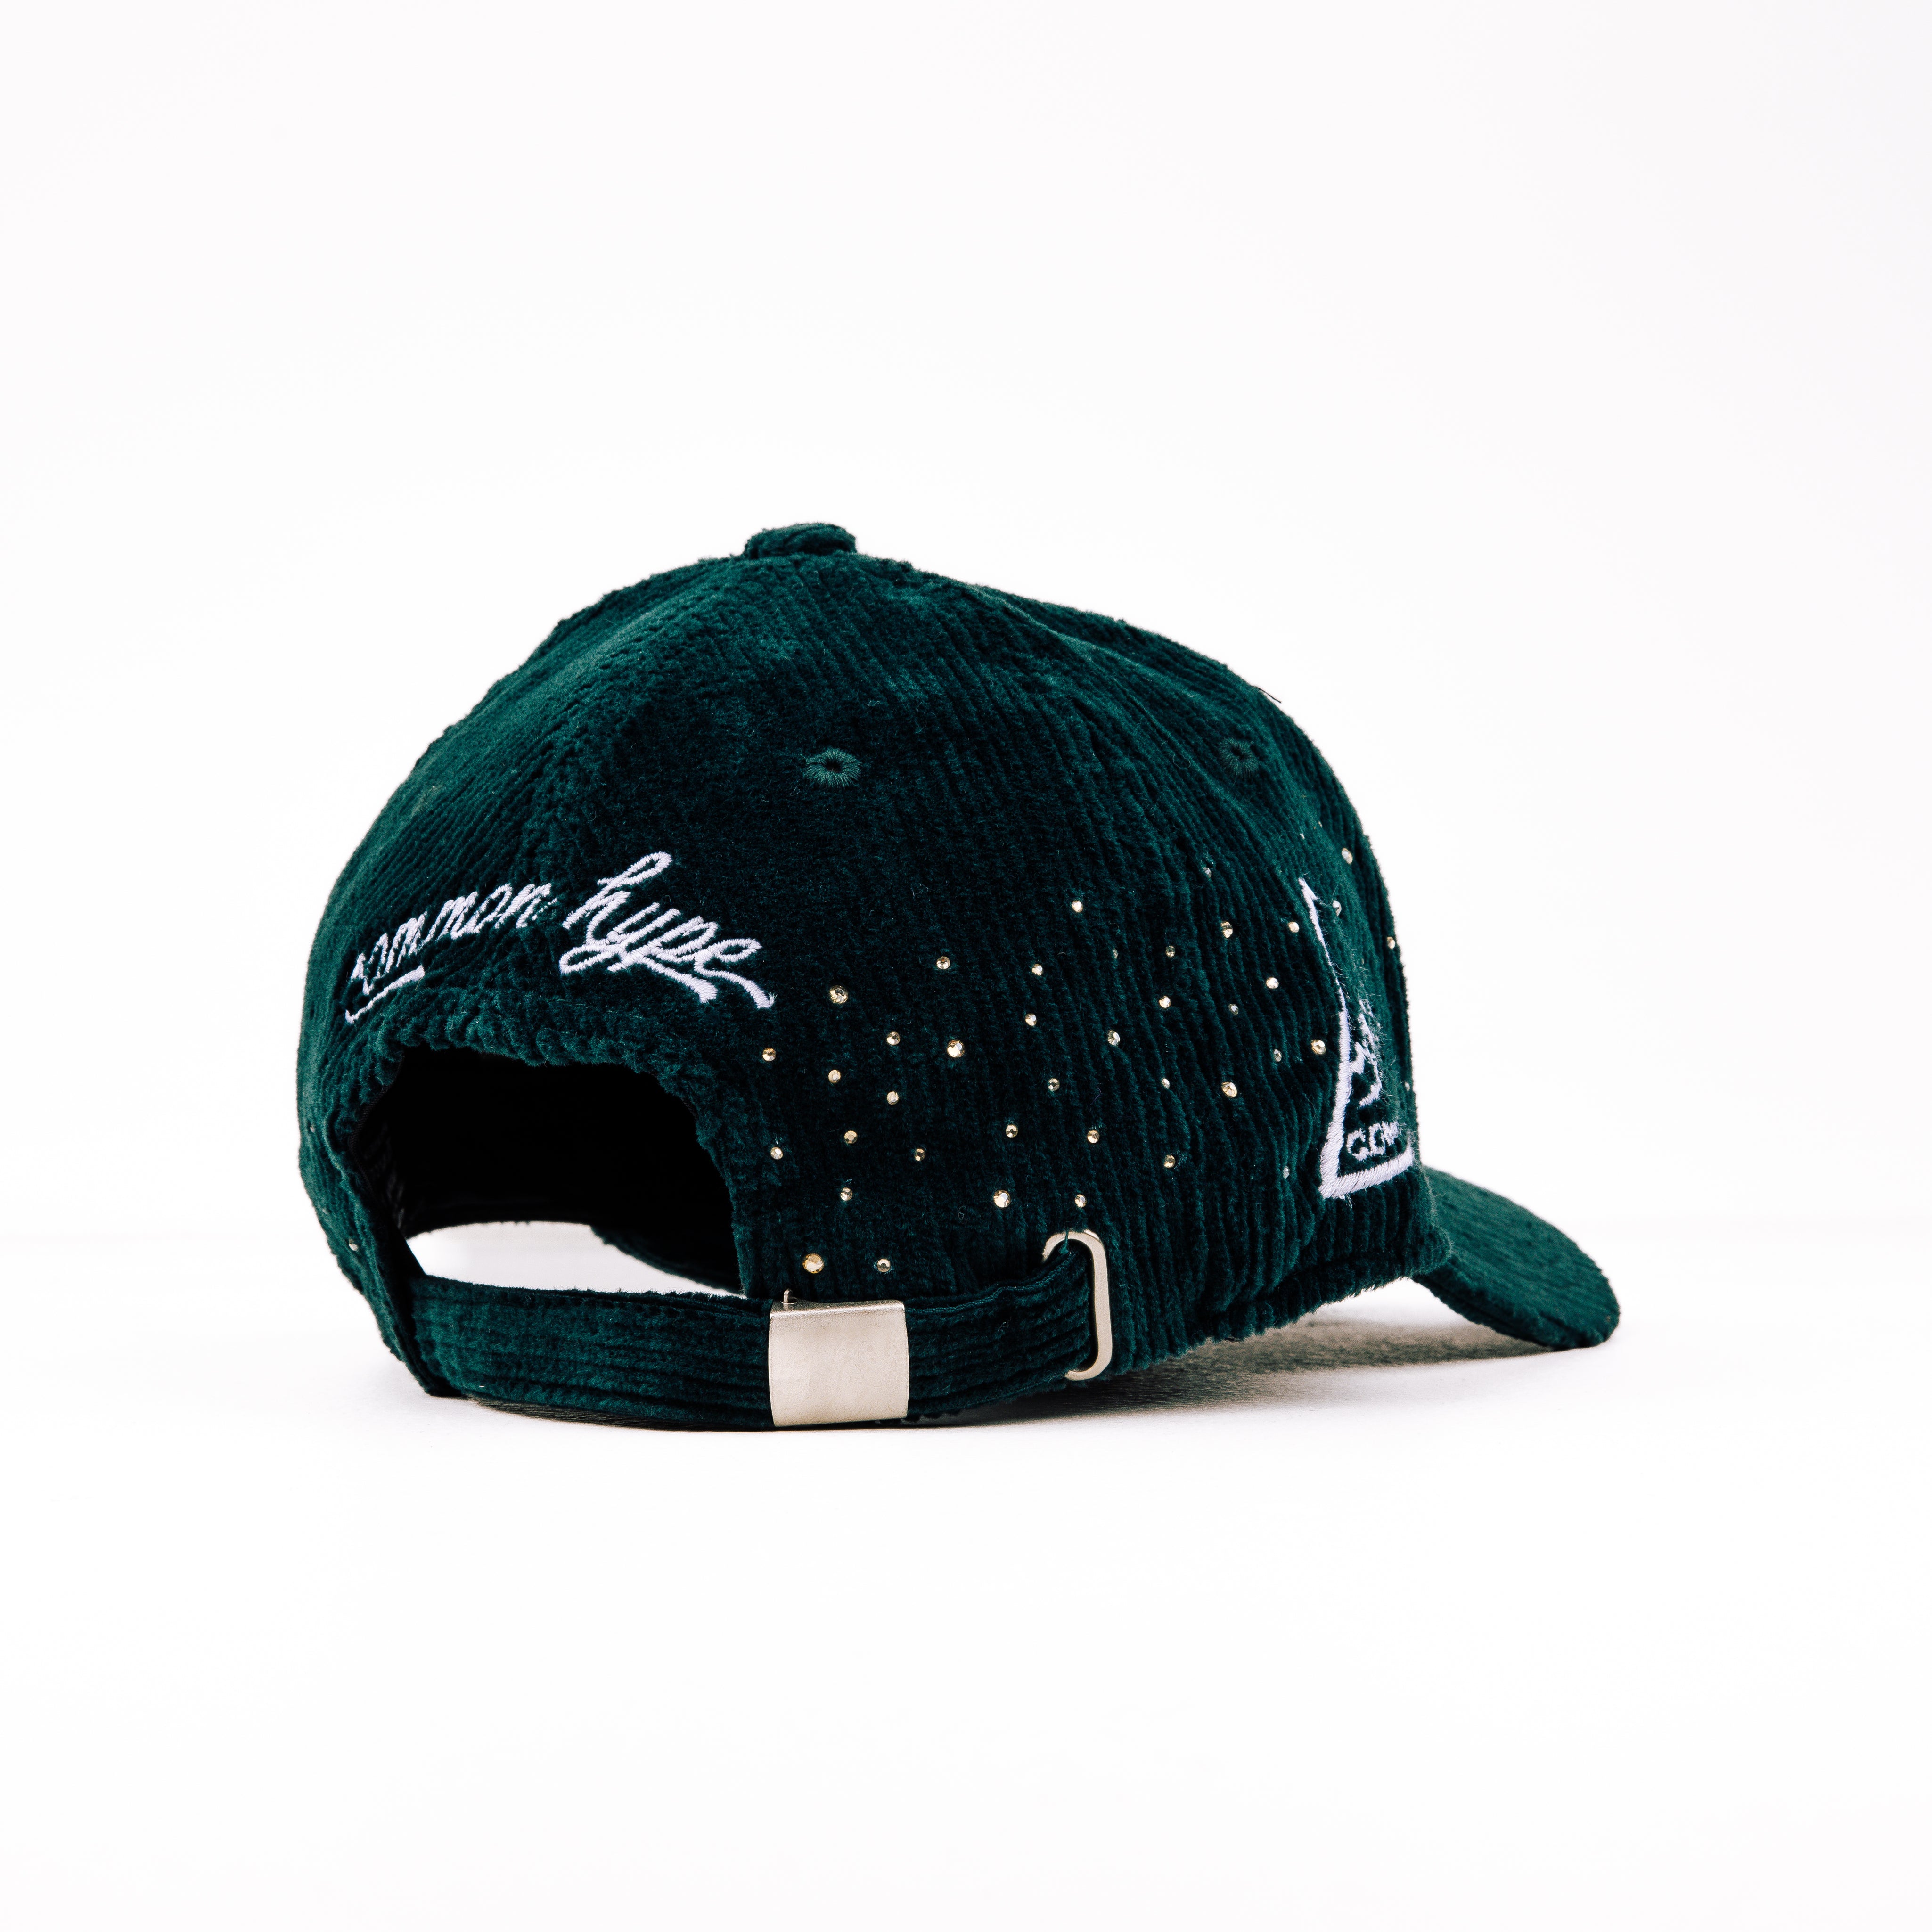 Common Hype “Crystal’d” Corduroy Hat (1 of 1) - H6